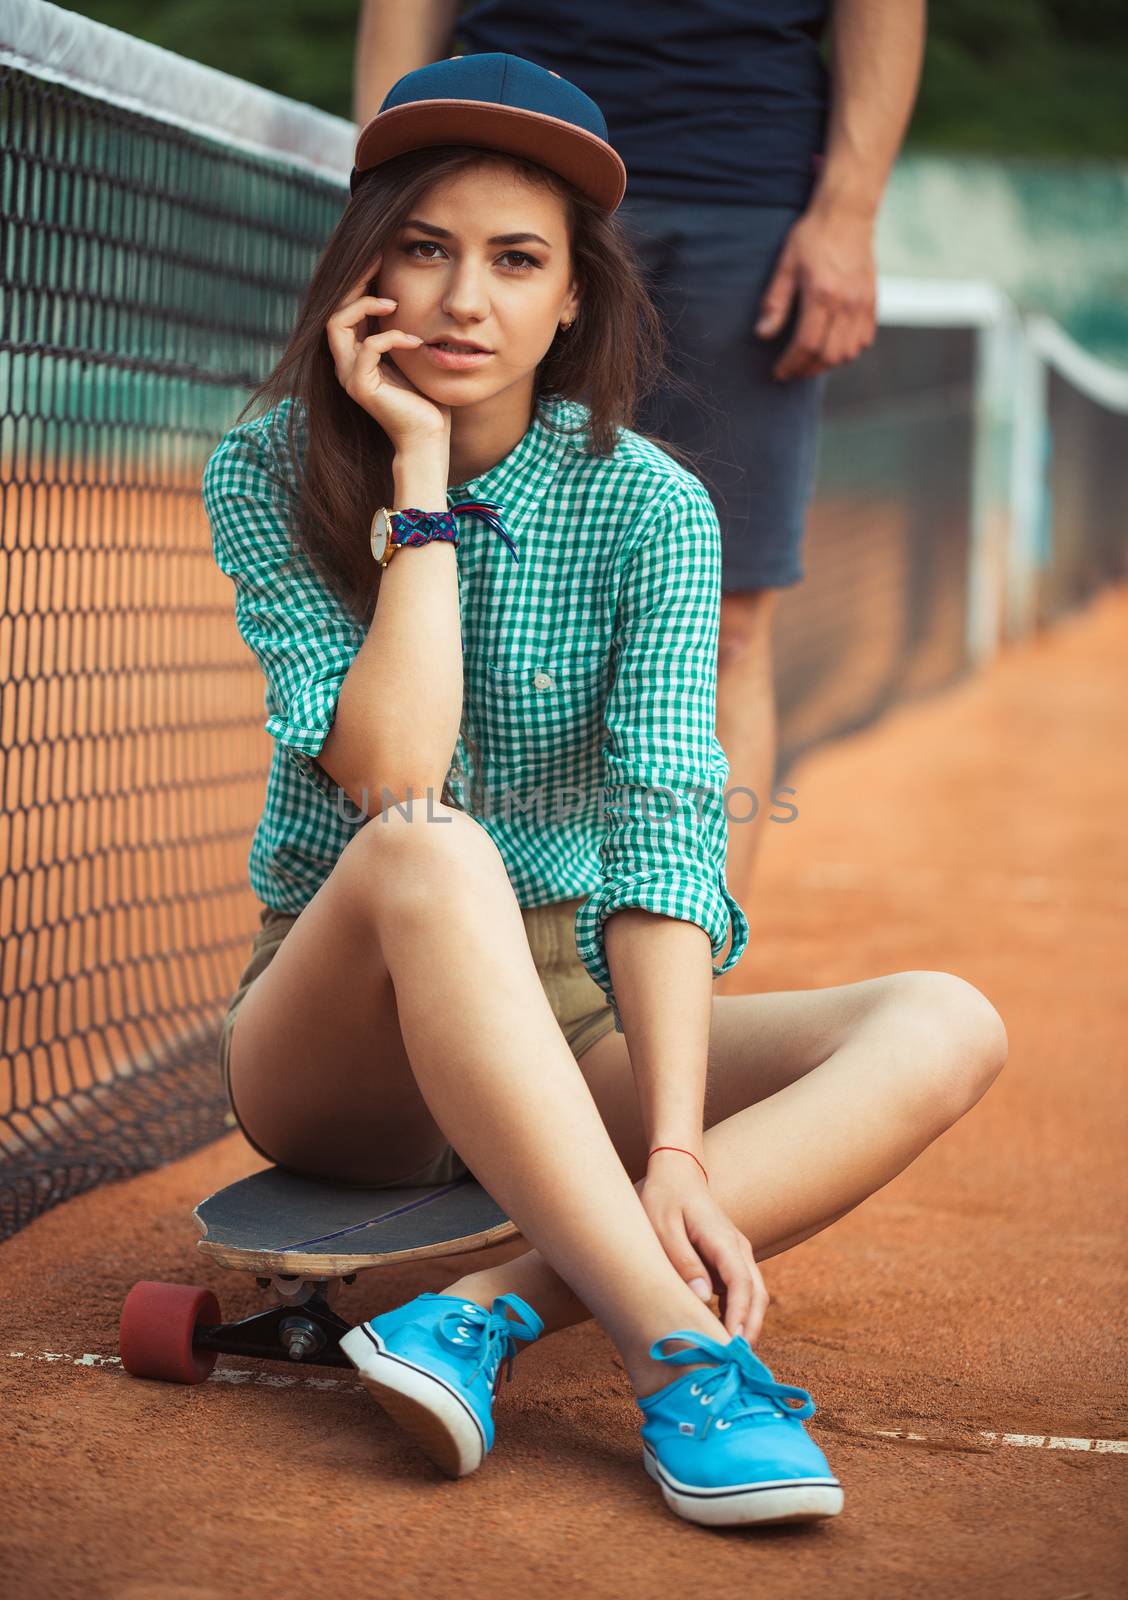 Girl sitting on a skateboard on the tennis court by vlad_star